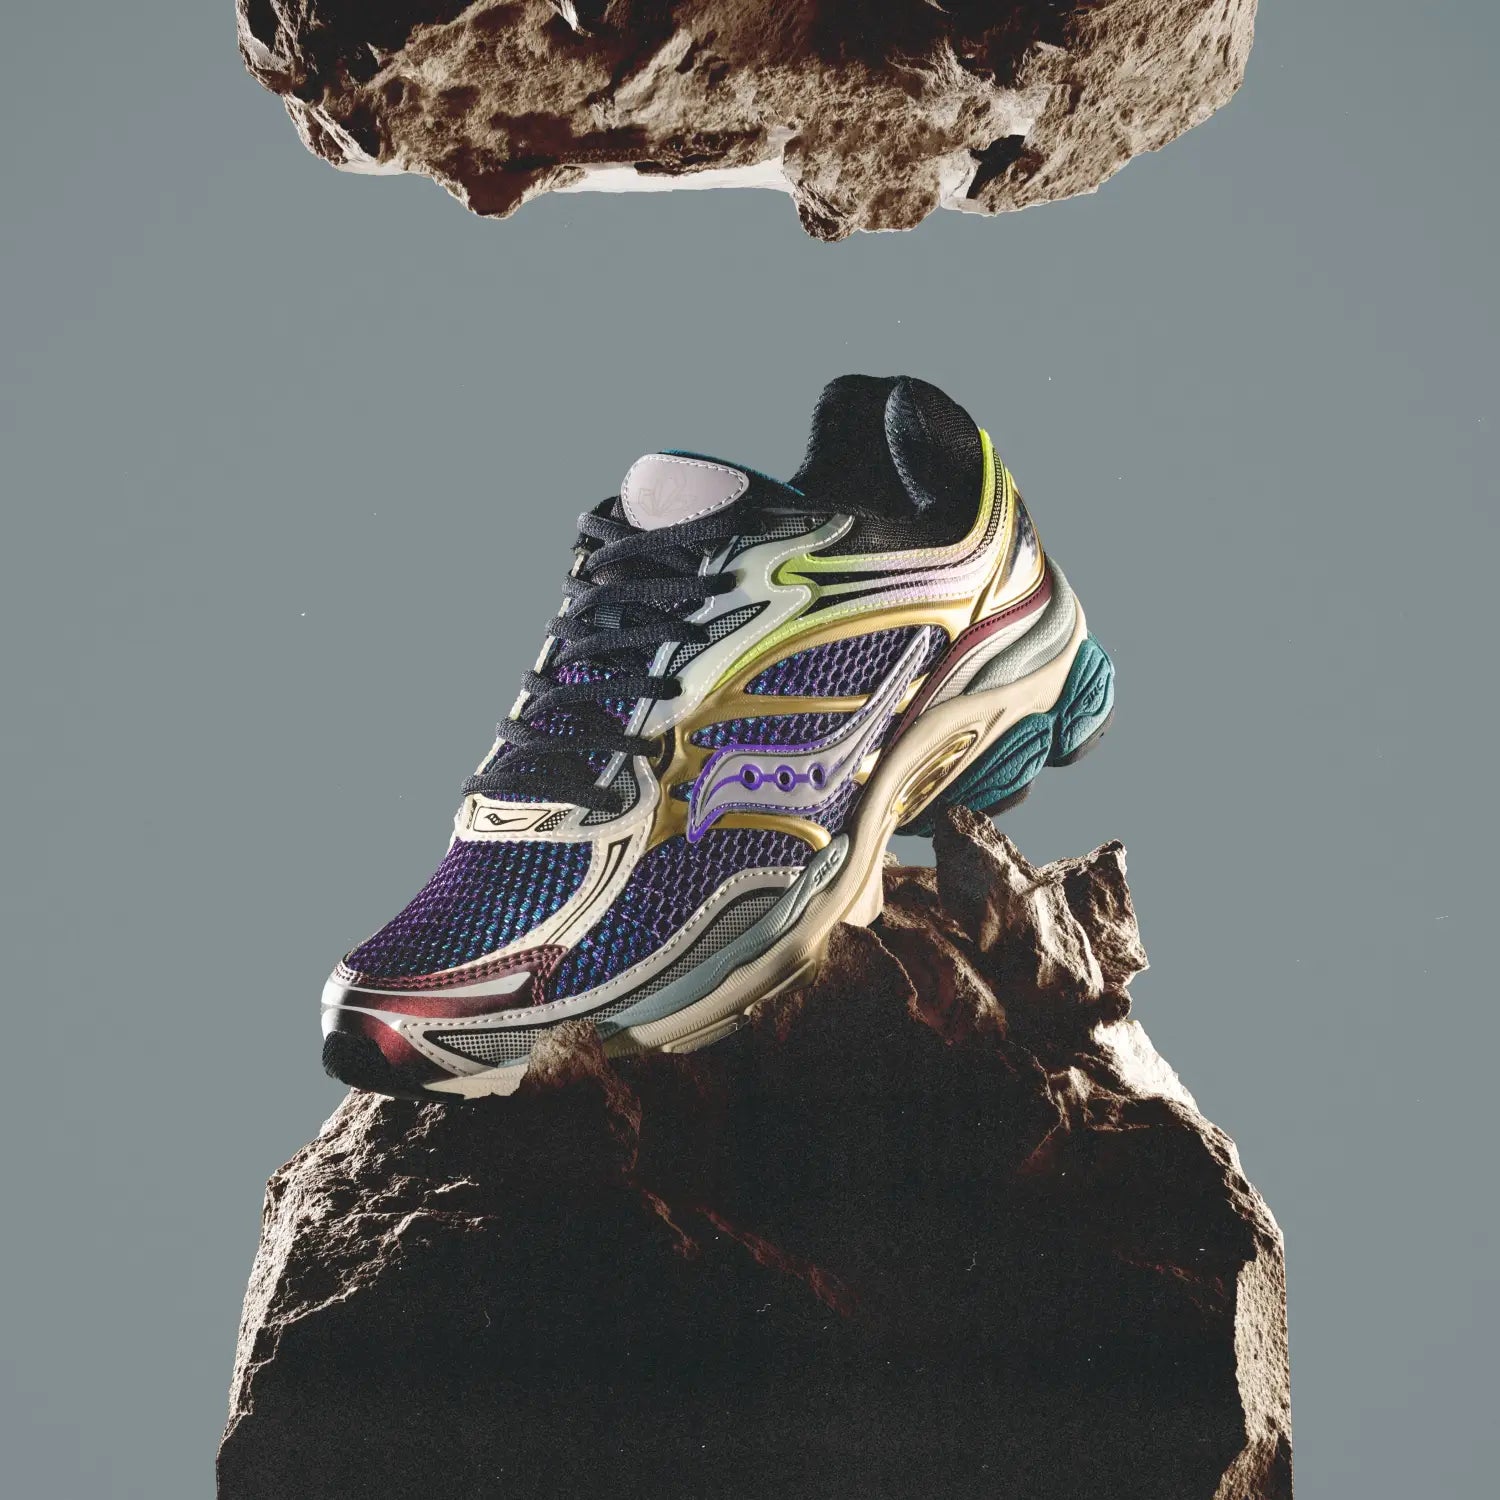 Discover the Enchanting ’Crystal Cave’ with Saucony’s ProGrid Omni 9